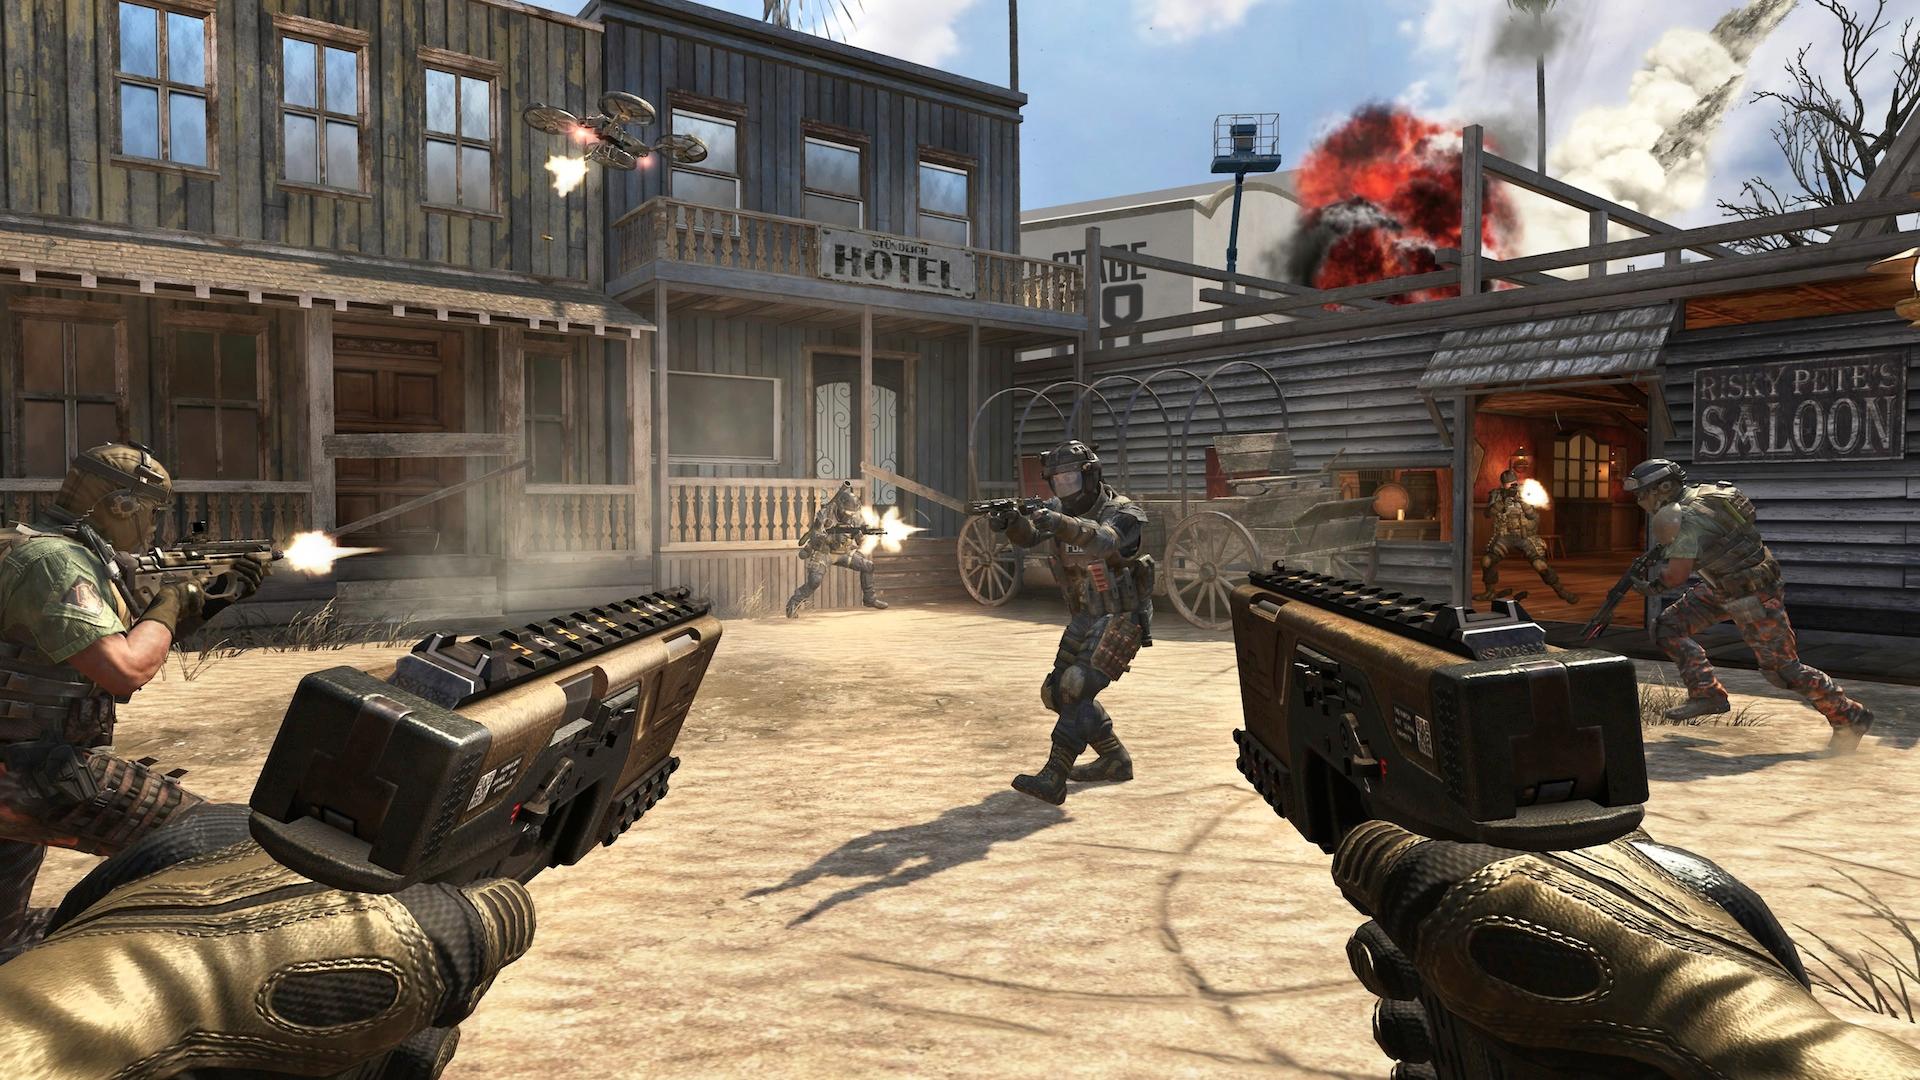 Black Ops 2's Revolution DLC free this weekend on Xbox 360 - Polygon